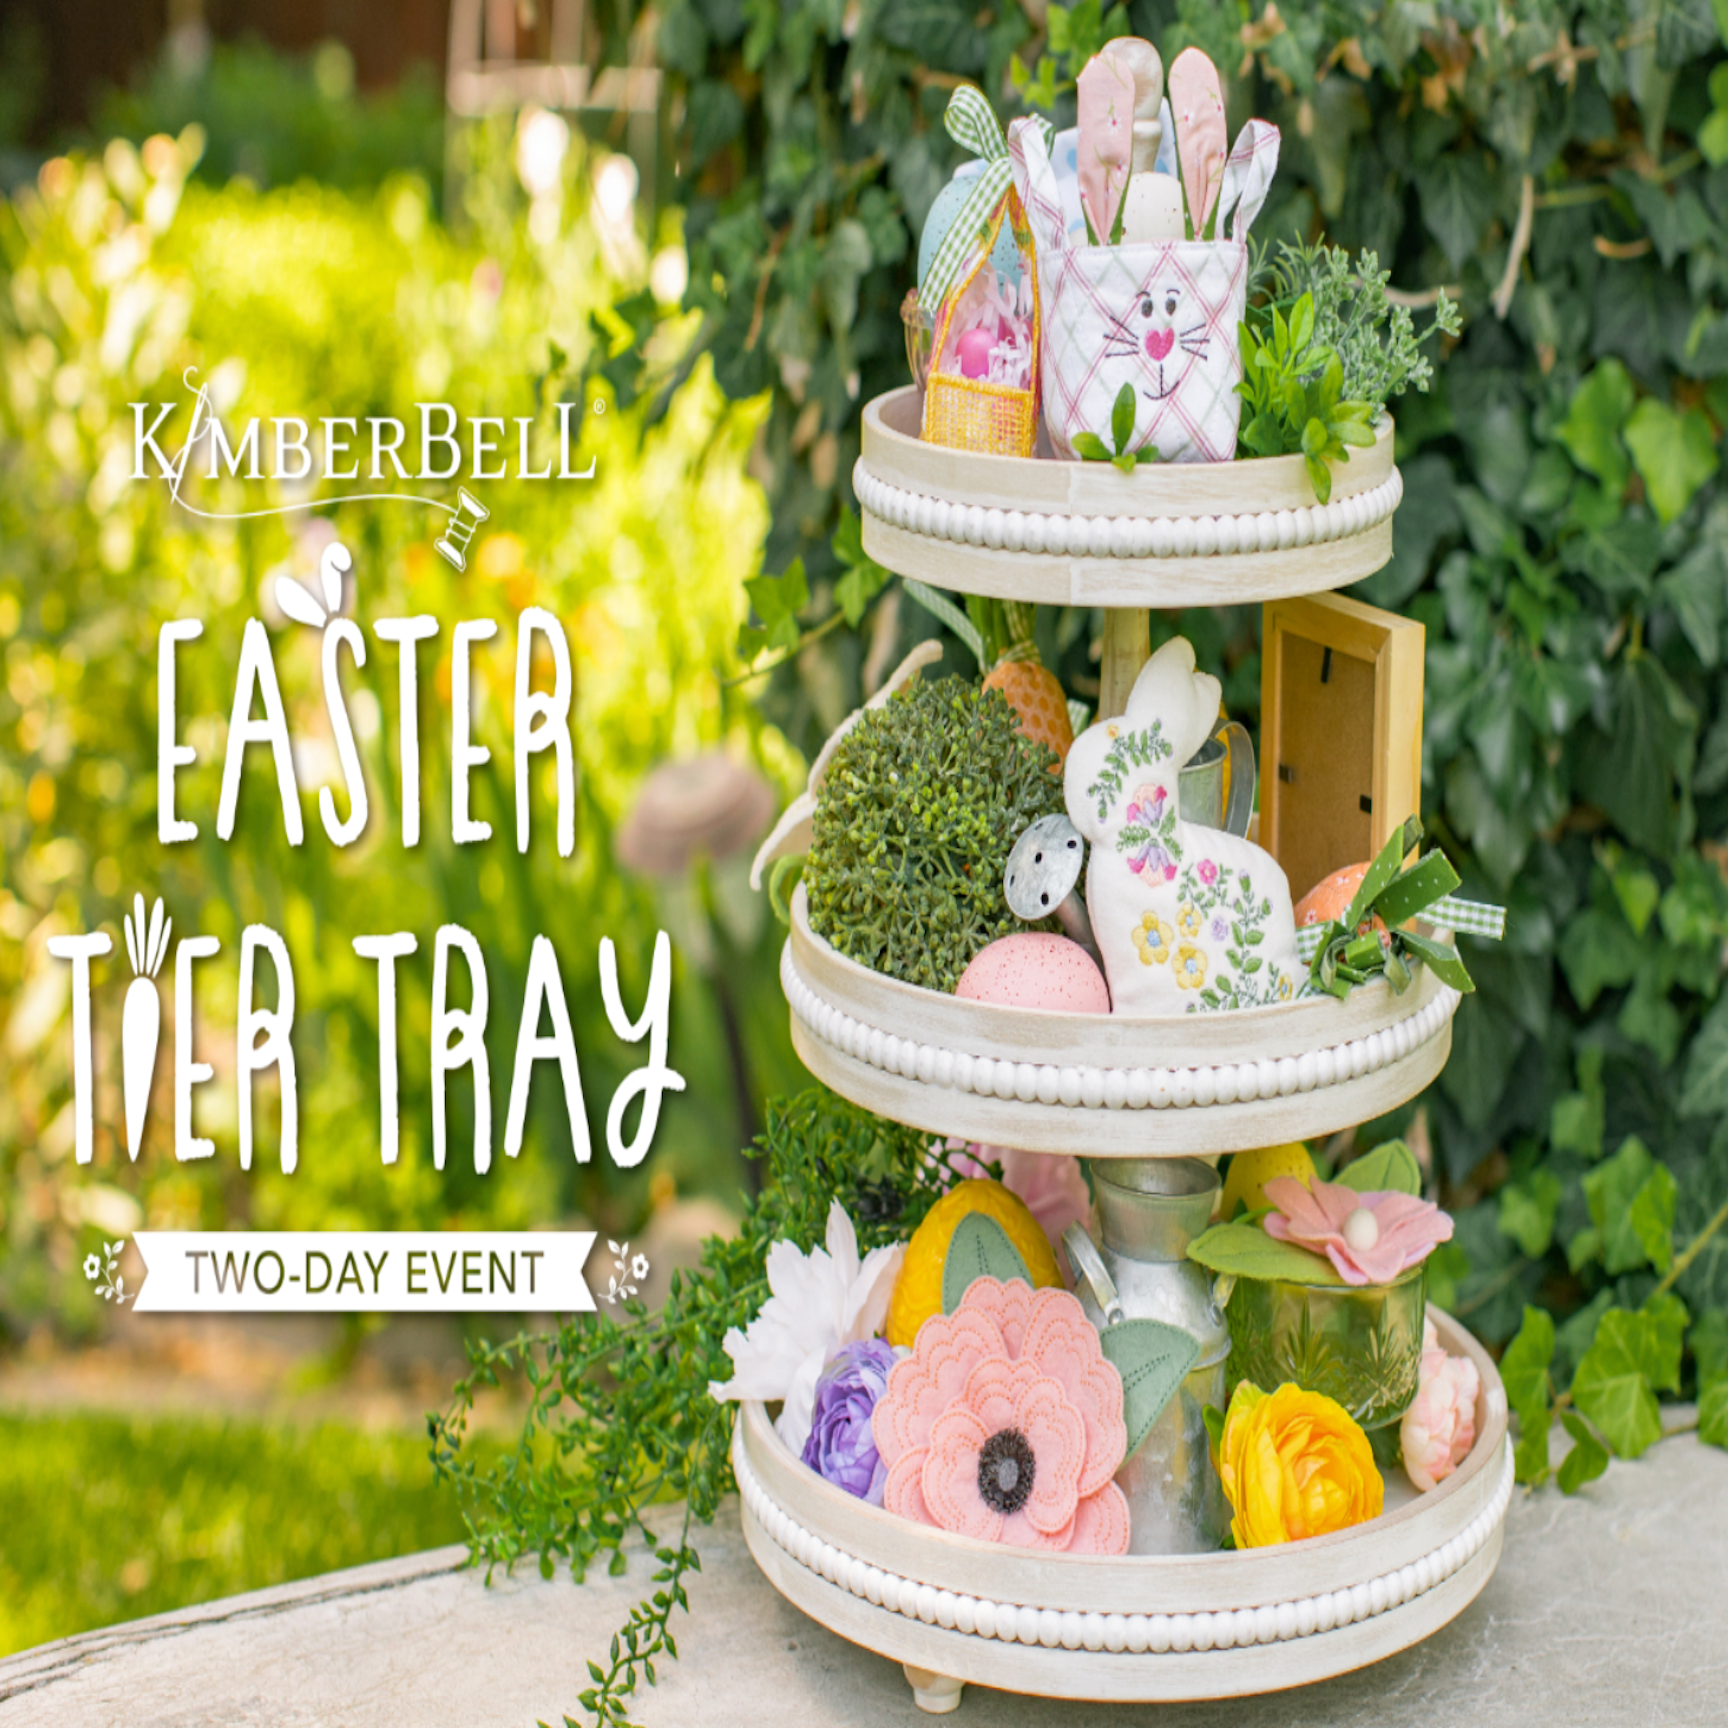 Kimberbell's Easter Tier Tray - Two-Day Machine Embroidery Event